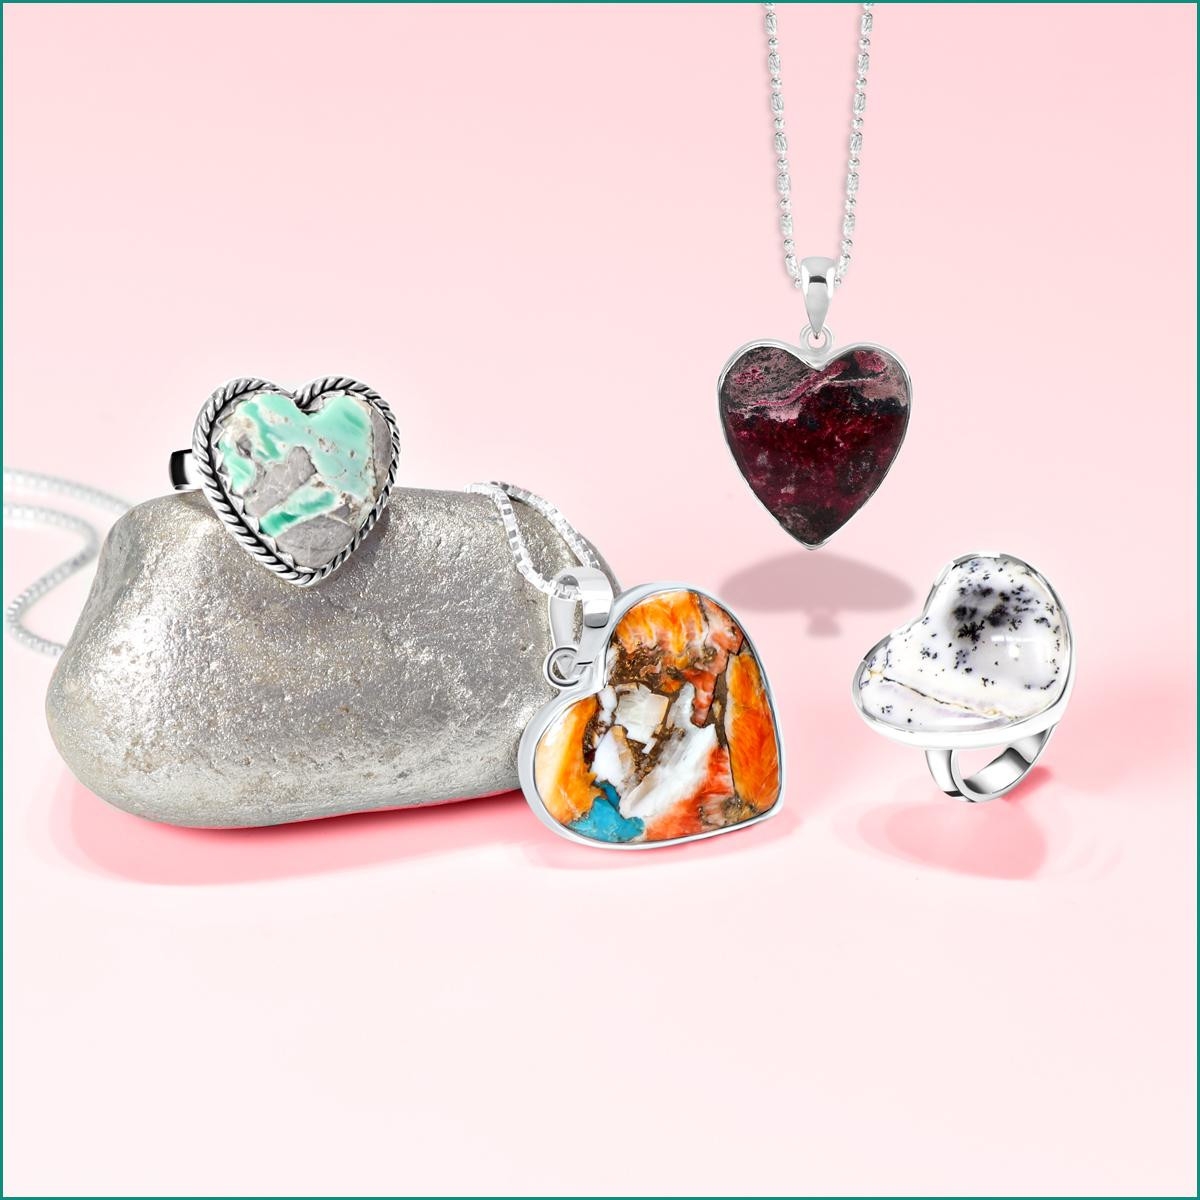  Valentine's day  Jewelry - A Guide For Choosing The Perfect Gift